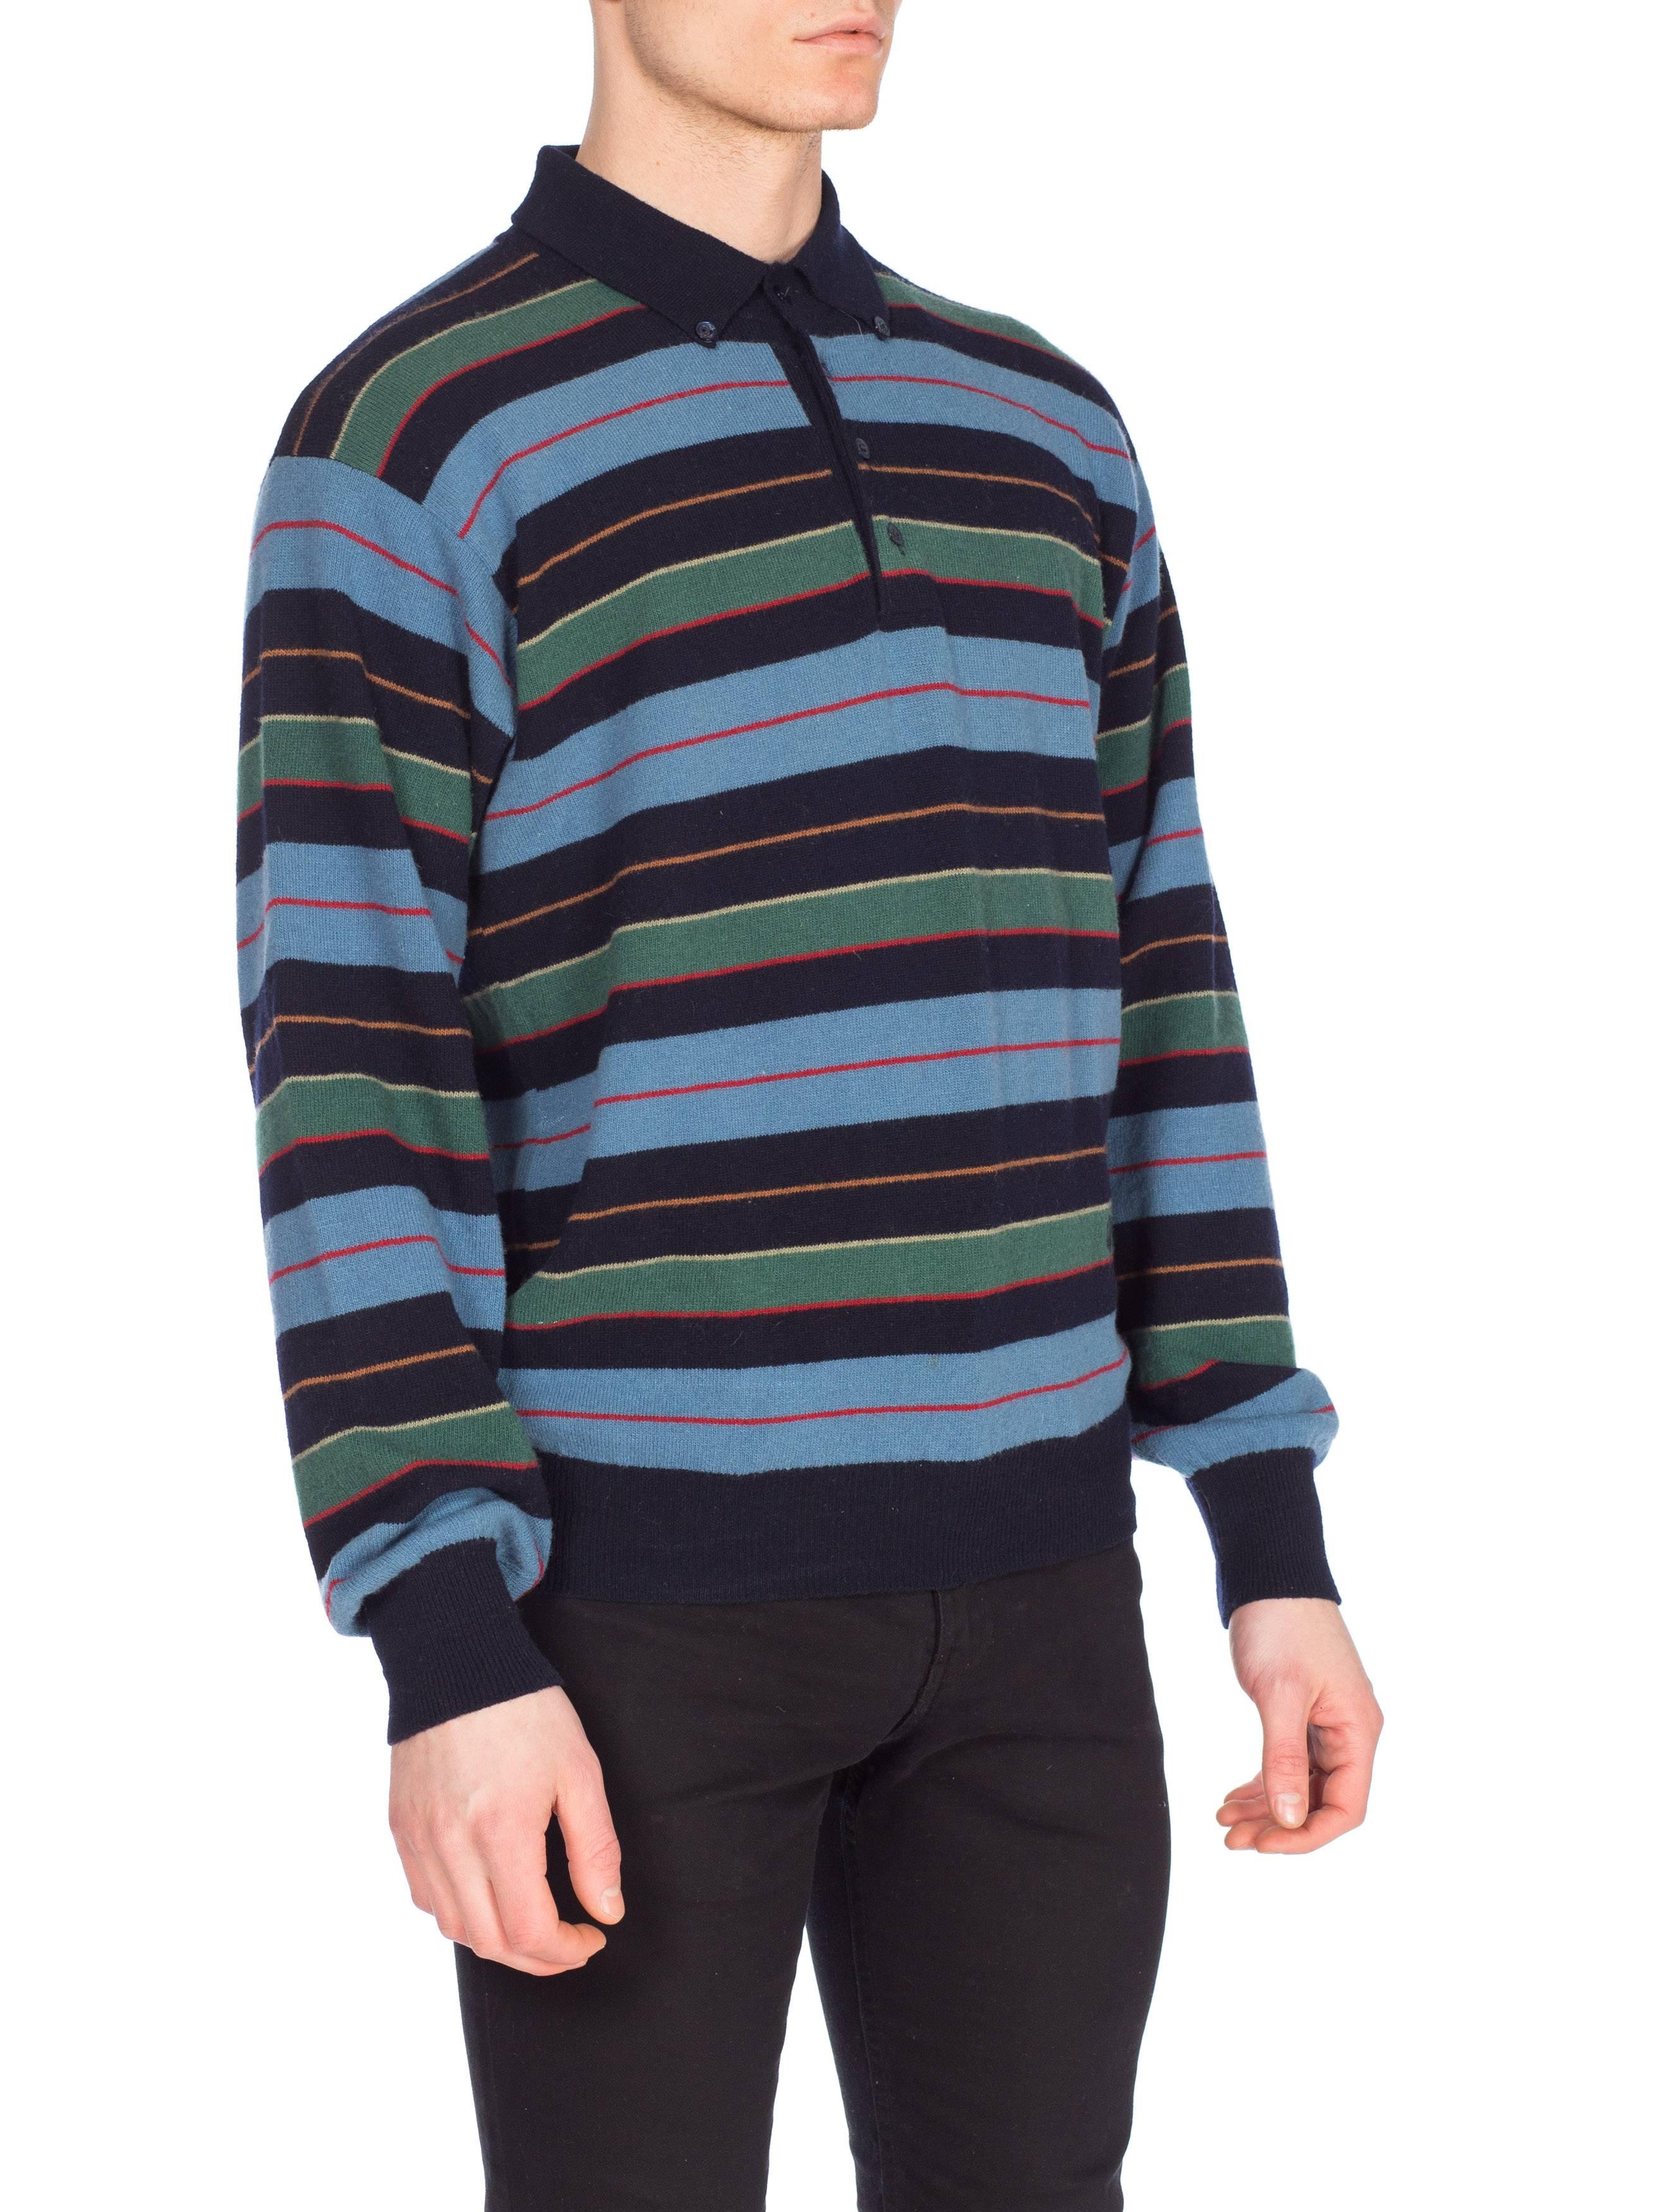 1980S GUCCI Blue & Green Striped Wool Knit Polo Neck Sweater With Logo Buttons For Sale 2